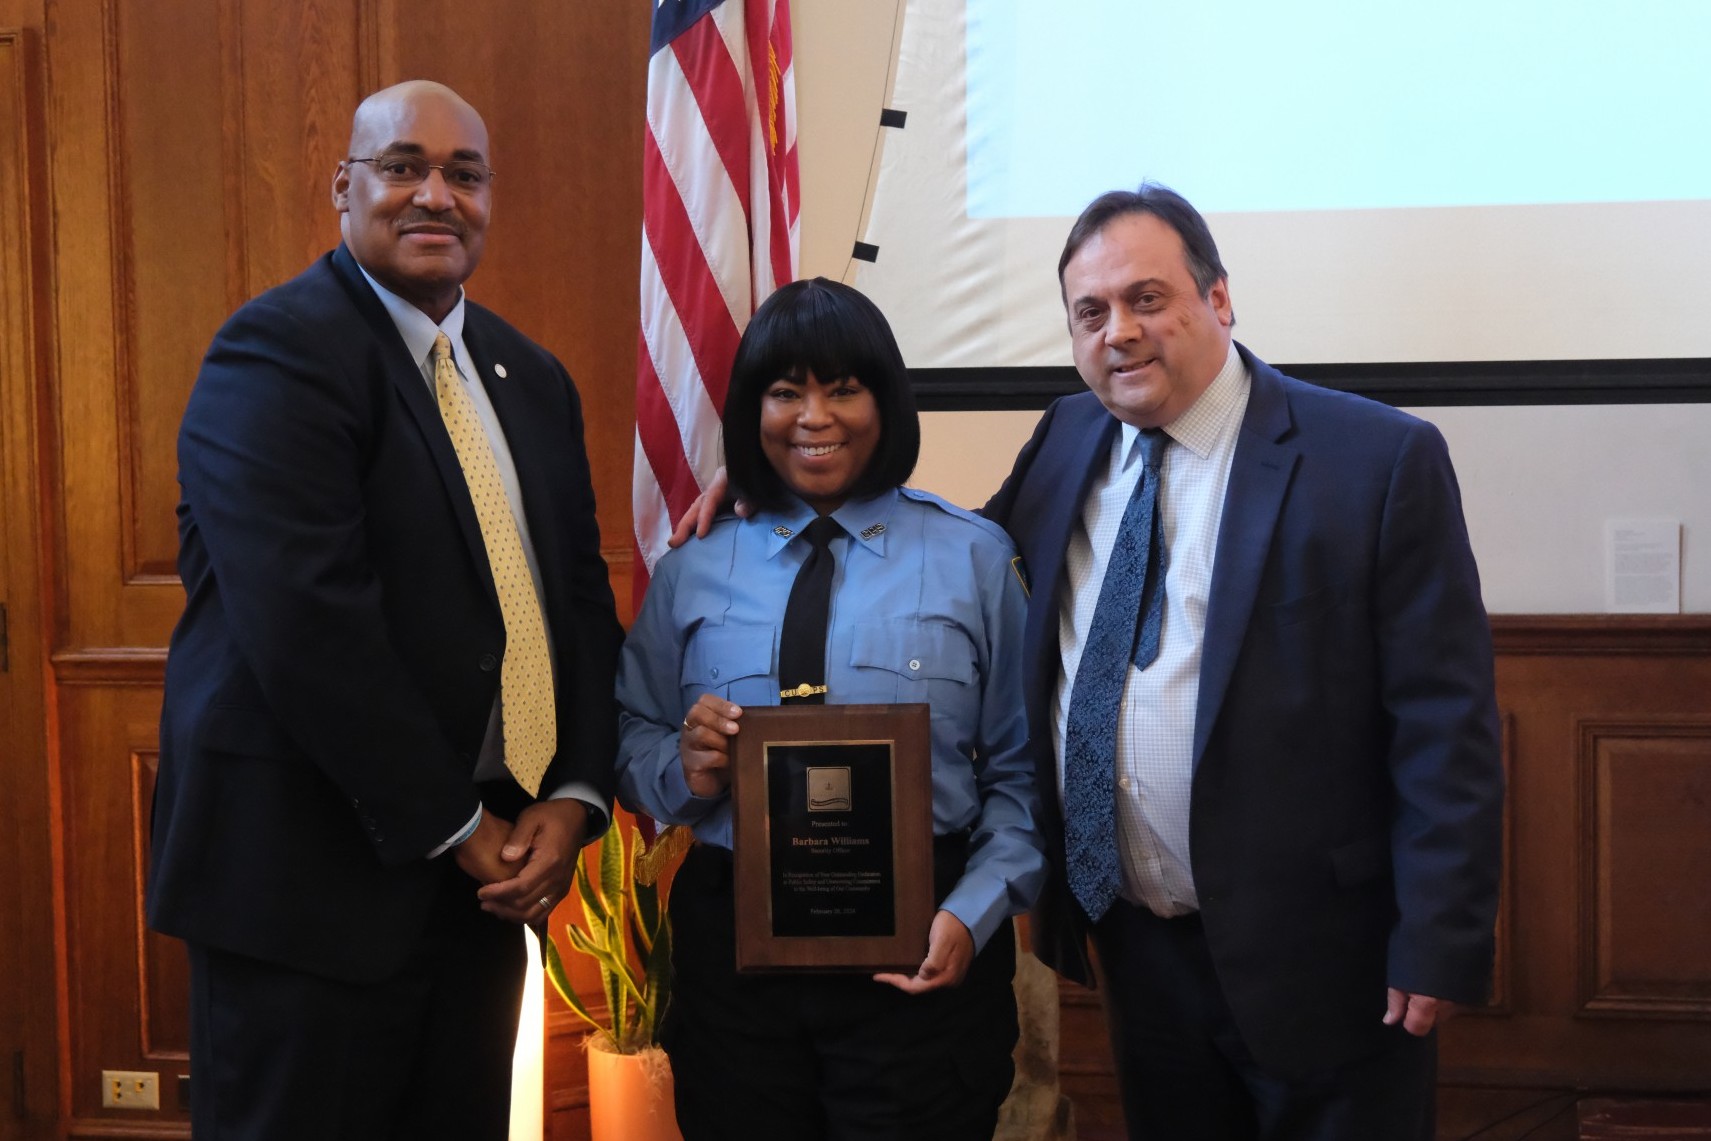 Barbara Williams poses with her special award and Gerald Lewis Jr. and Patrick Oakley